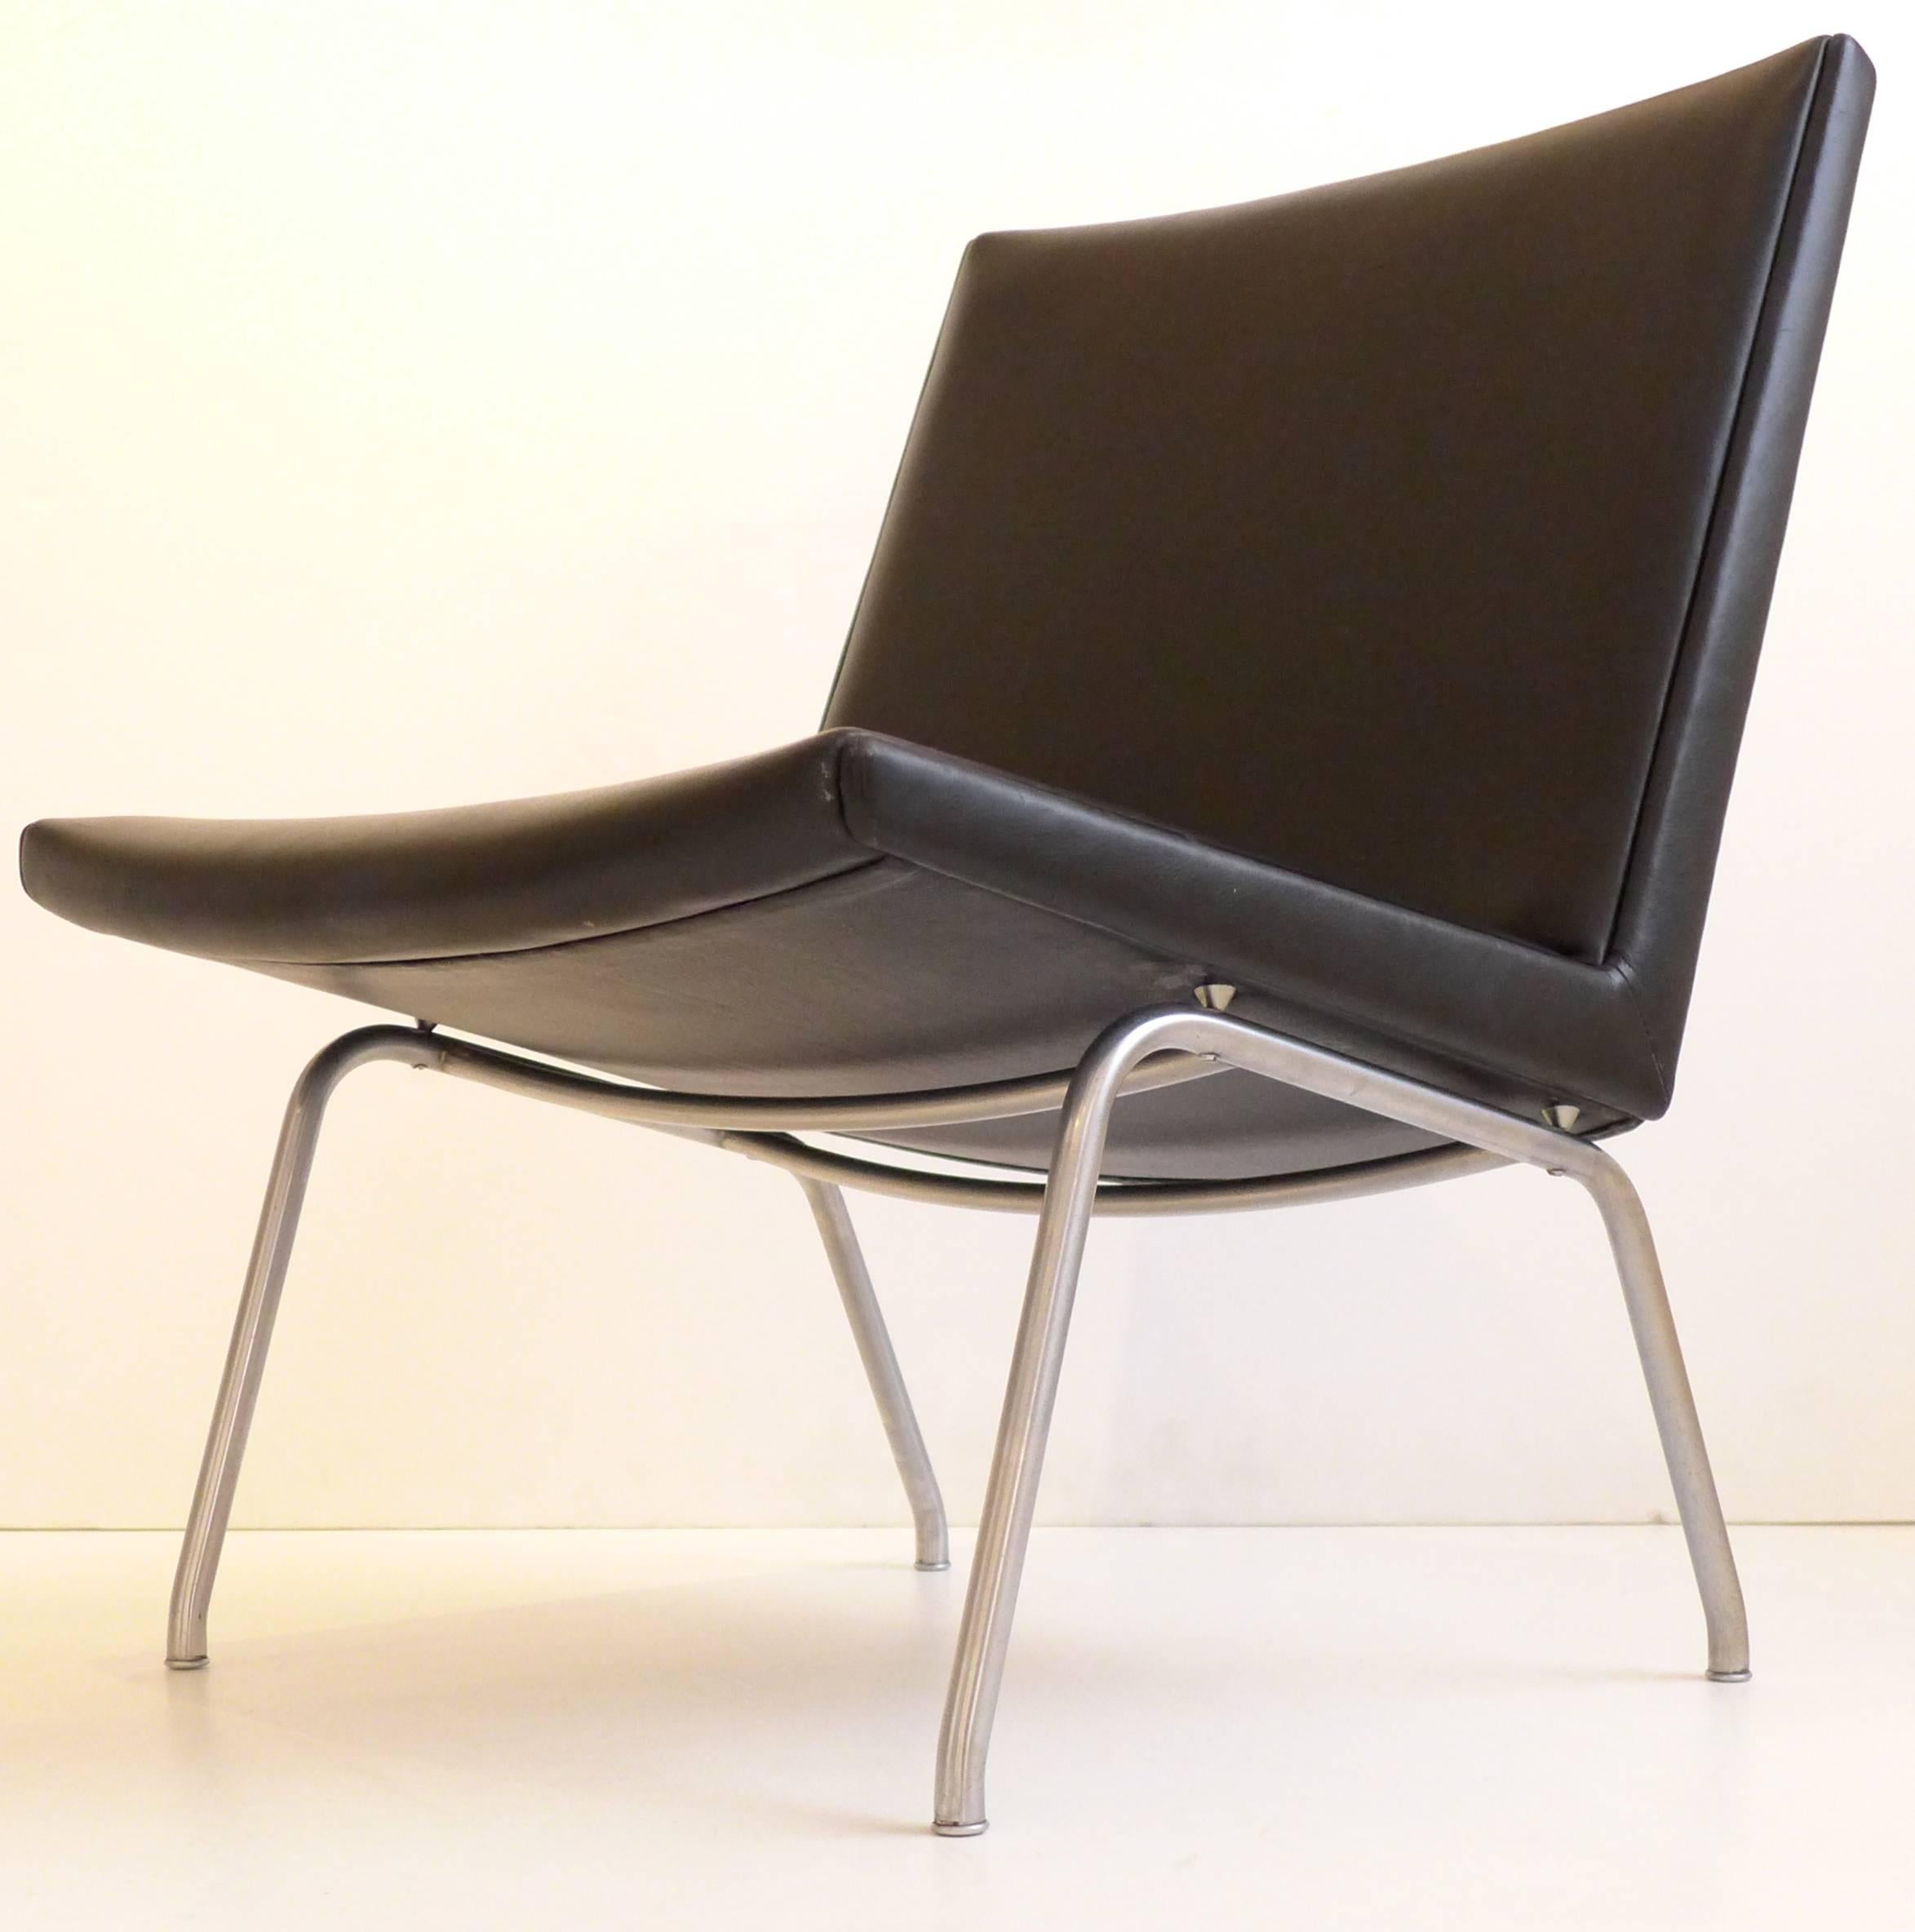 Sleek easy chair in chrome-plated steel and leather. Designed by Hans Wegner for the Kastrup Airport in Copenhagen and produced by A.P. Stolen from 1959-c. 1980. This is a vintage example in fine original condition, with only minor wear to the steel